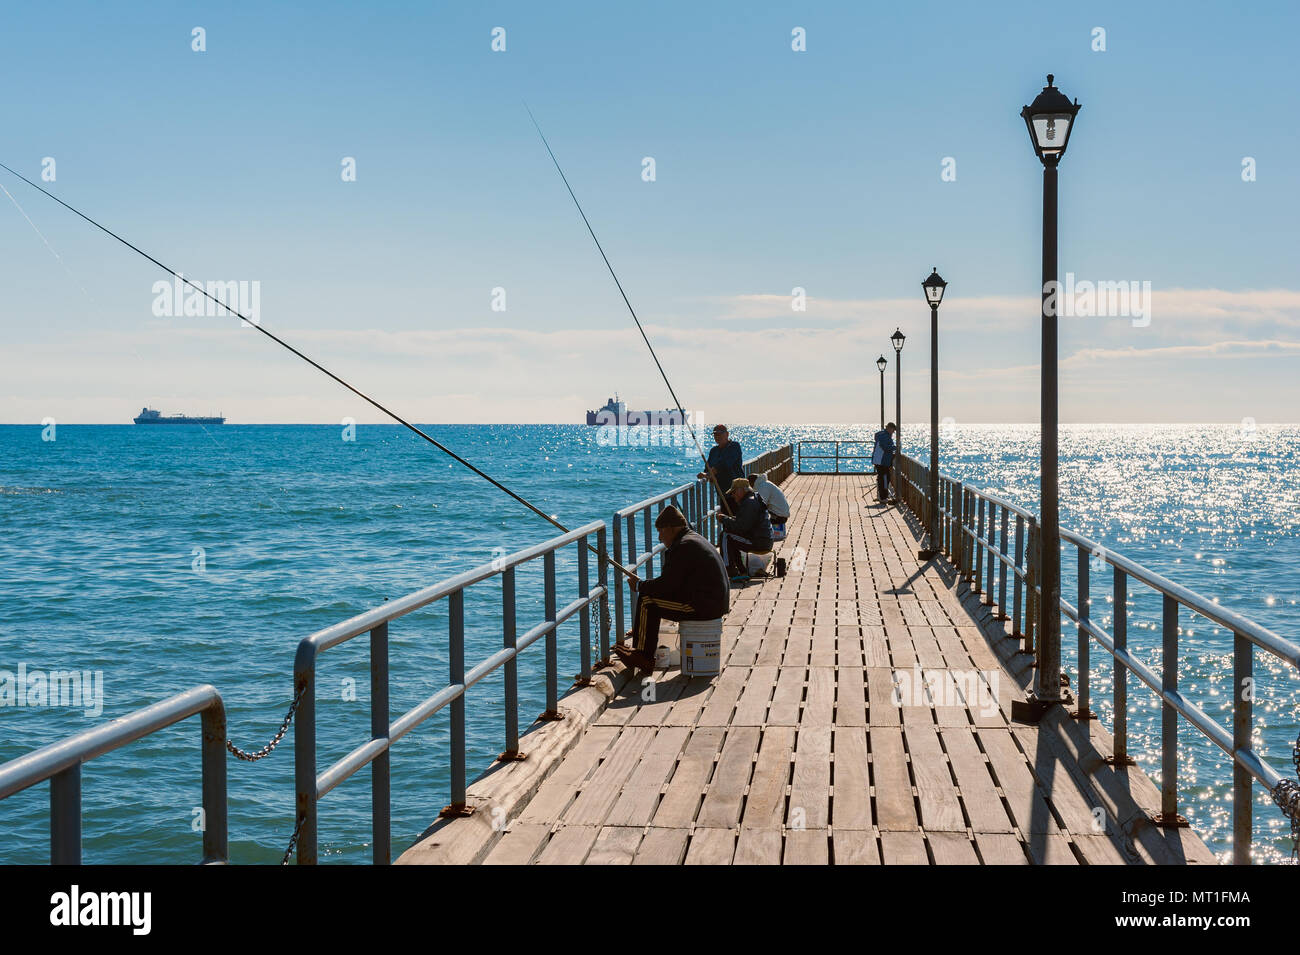 Men Fishing on Jetty in Limassol, Cyprus. Cyprus is an Eurasian island country in the Mediterranean Sea and southeastern most part of Europe. Stock Photo